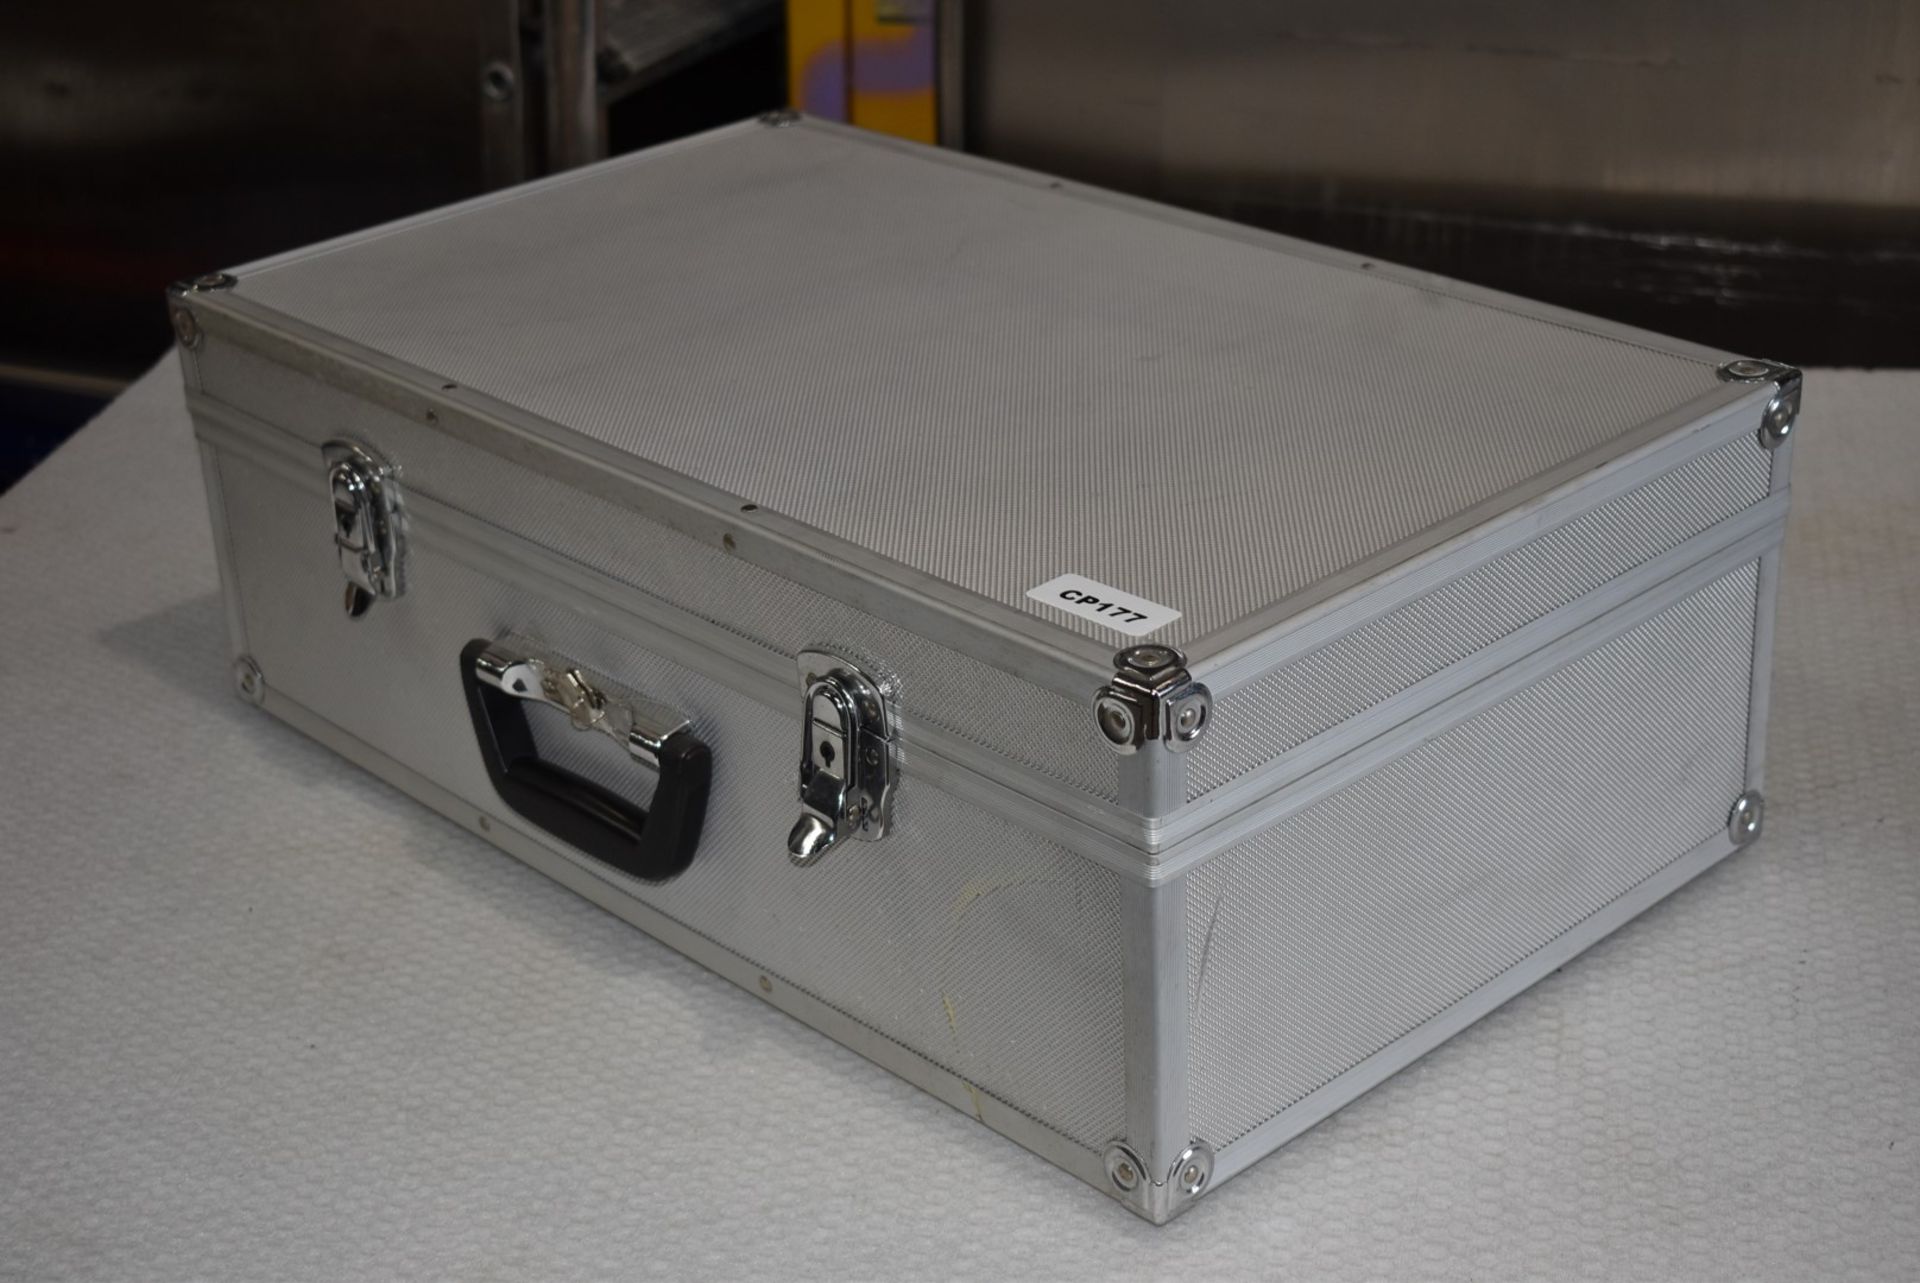 1 x Foam Padded Heavy Duty Transit Case - With Lock and Key - Size: 58 x 35 x 20 cms - Image 5 of 5